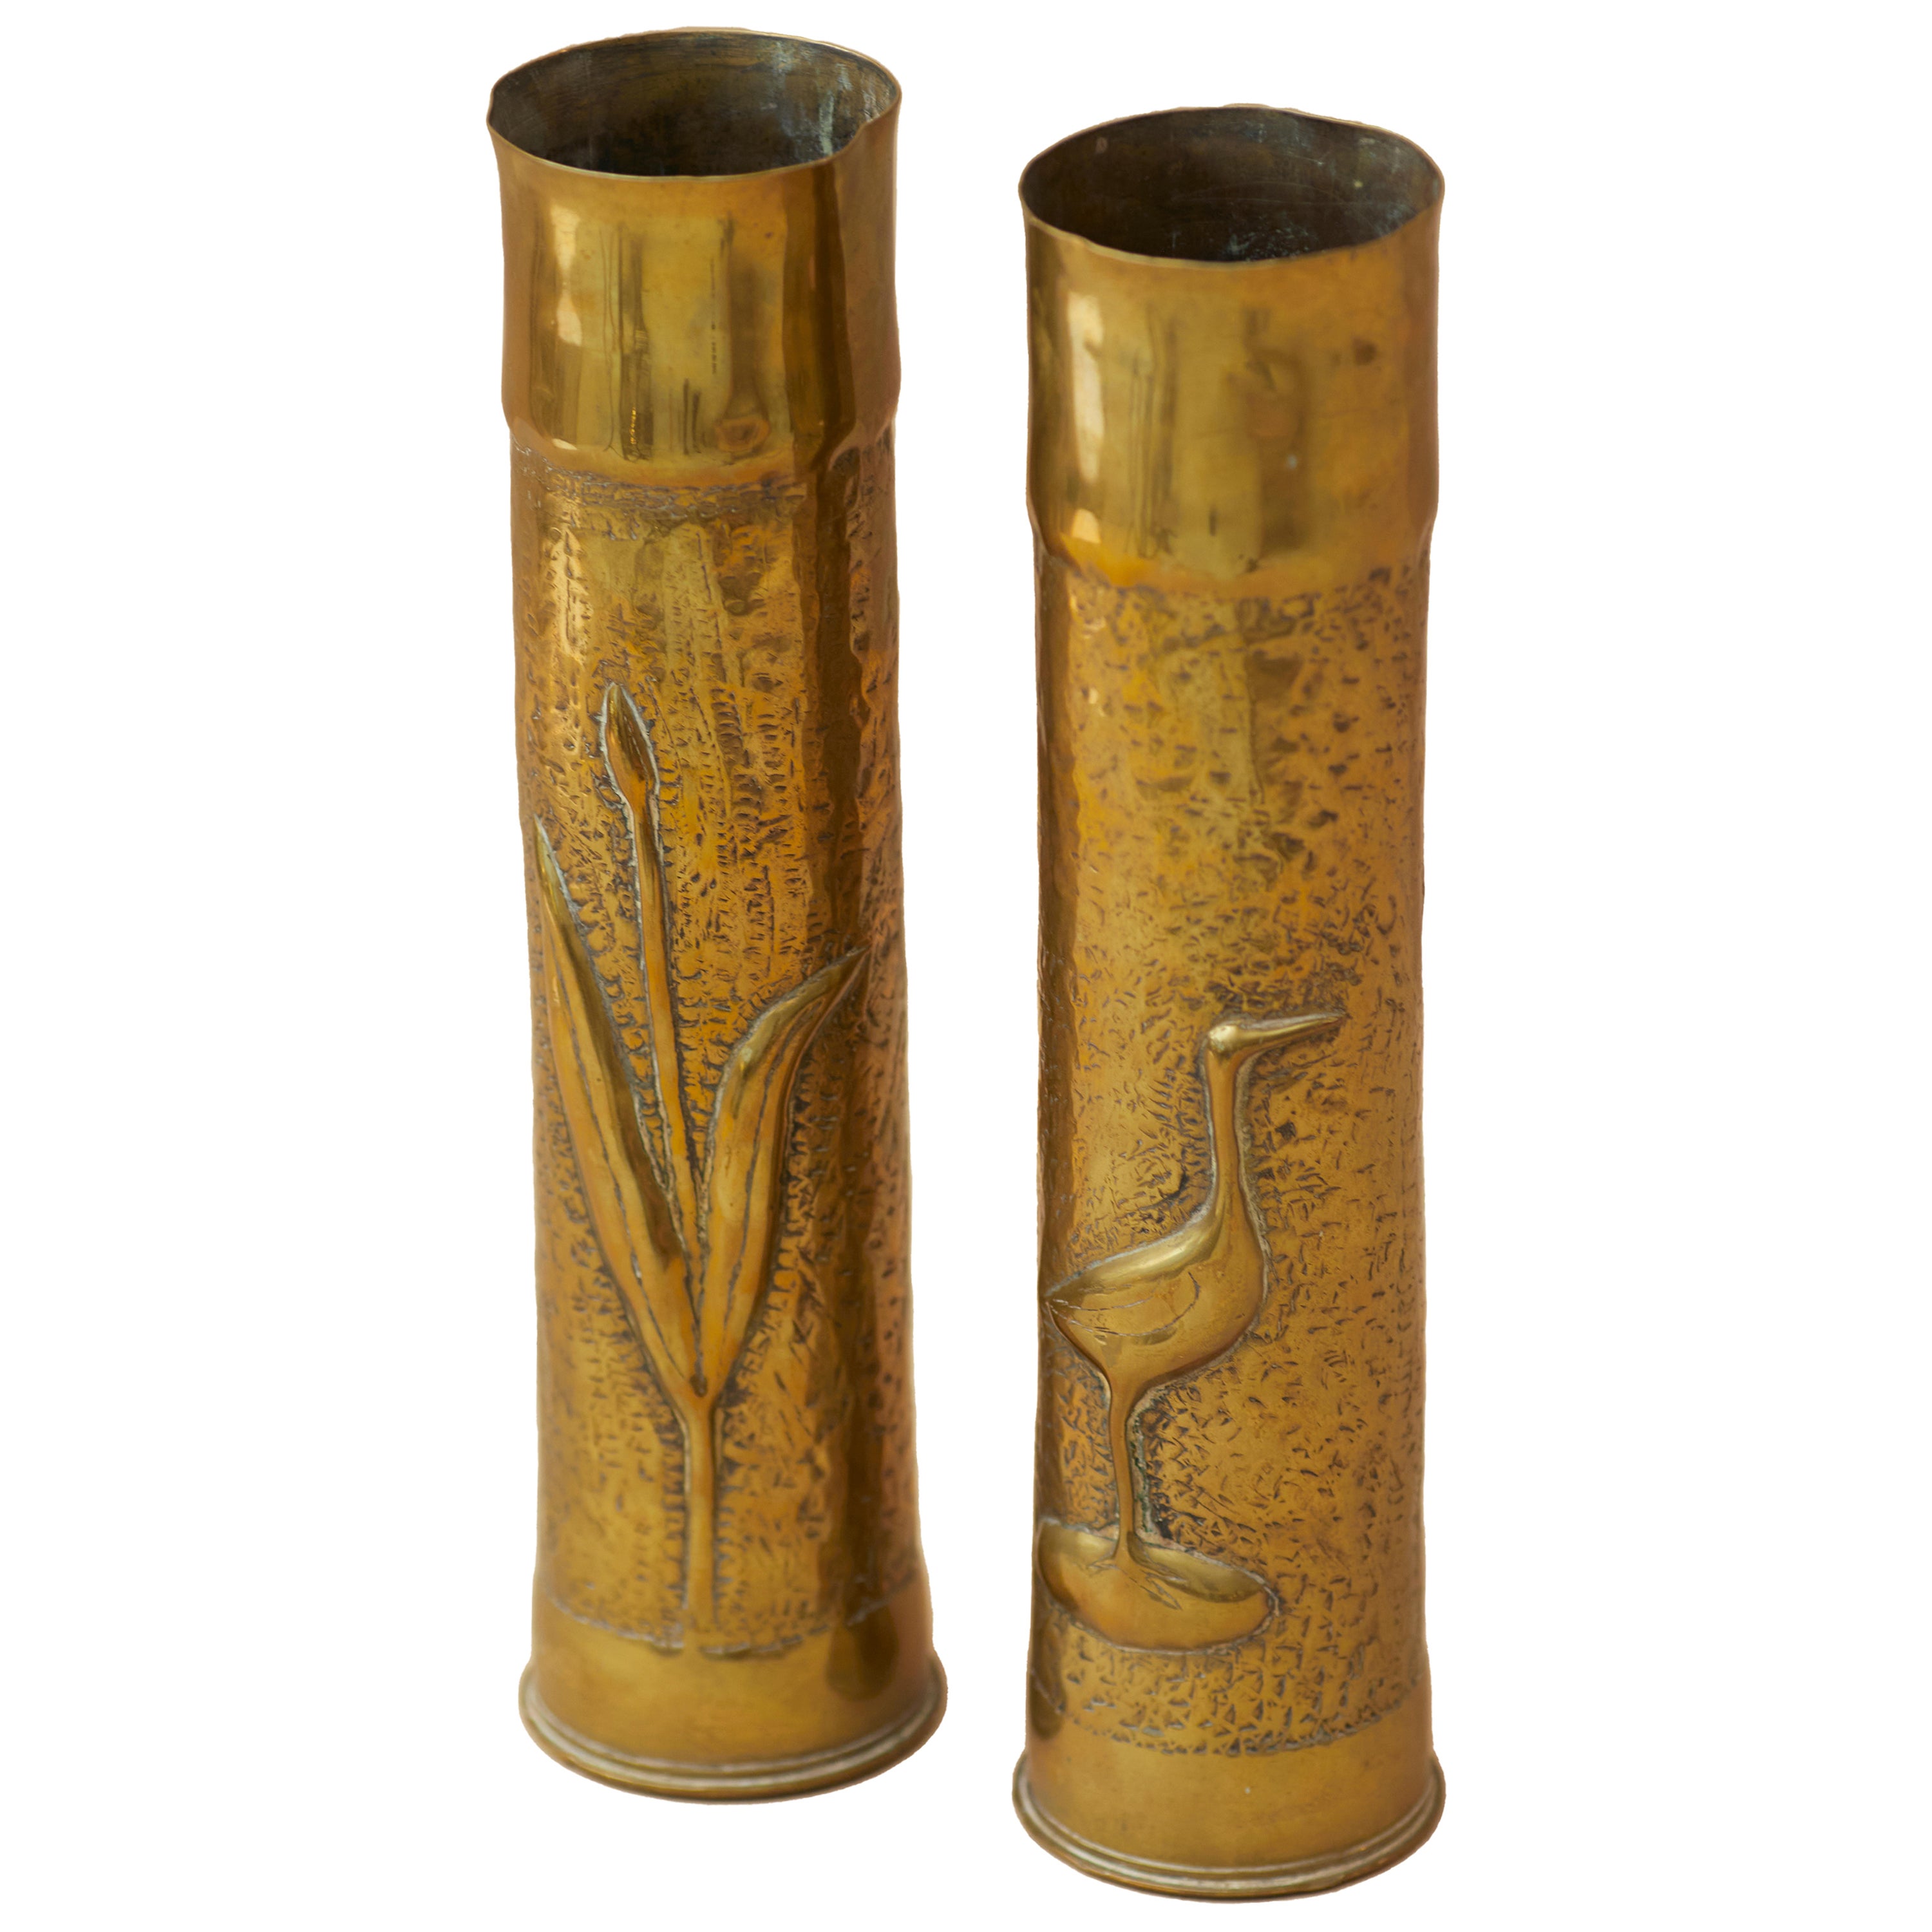 Pair of WW1 French Trench Art, Art Deco Artillery Brass Shell Casing Vases For Sale